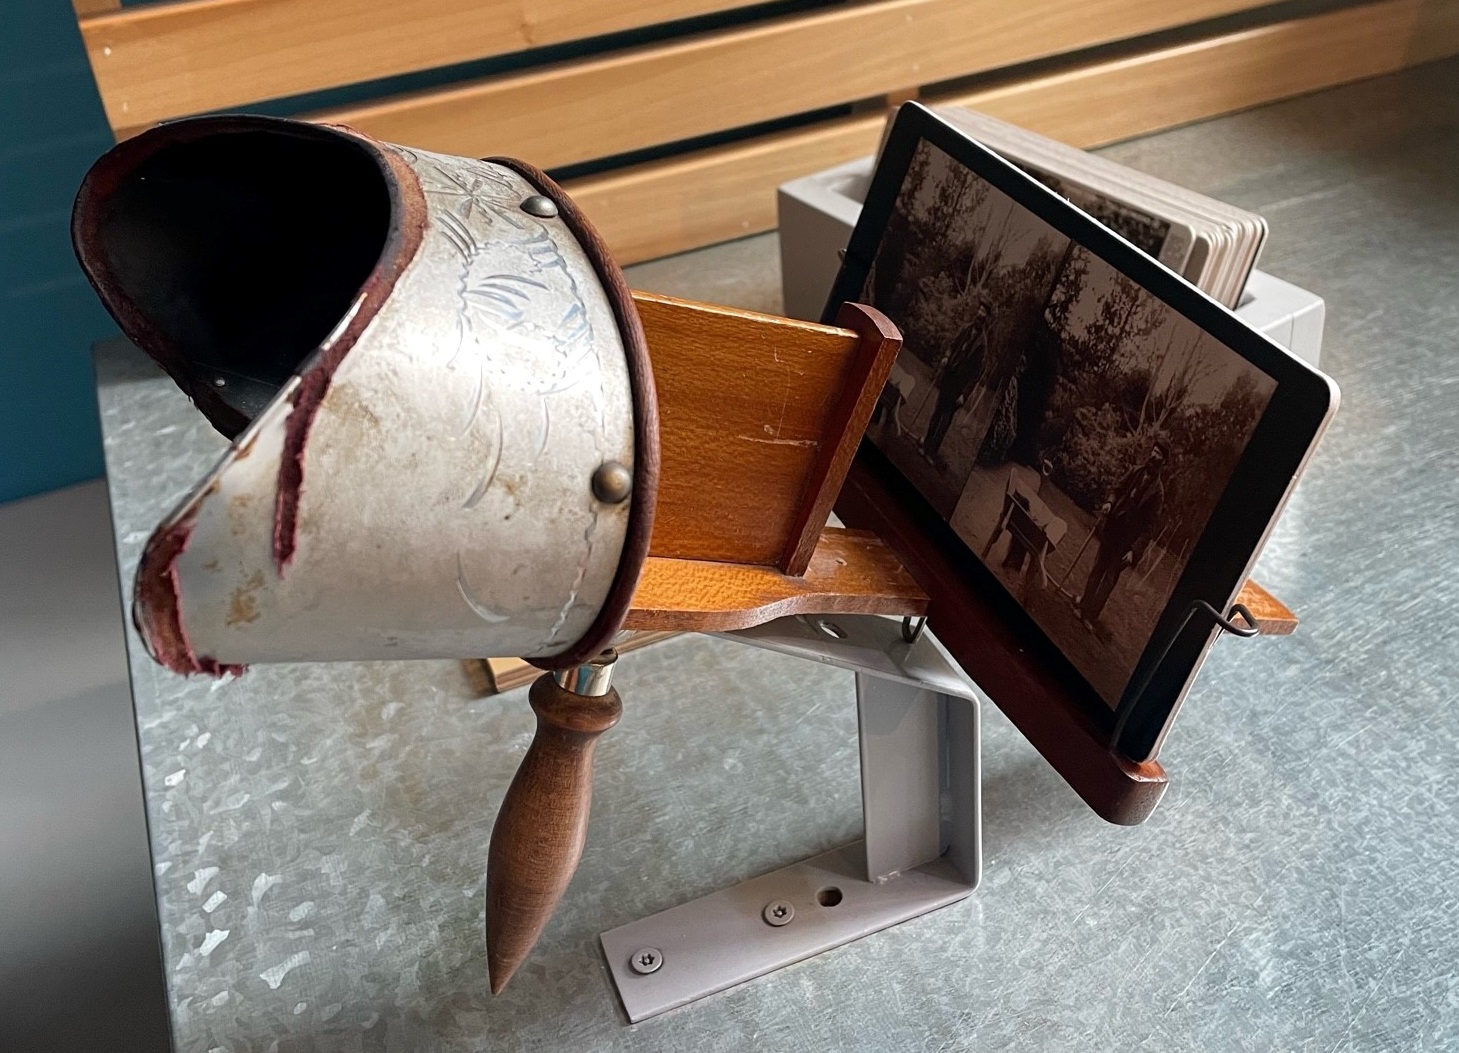 Stereoscope and stereo cards on display at London’s Garden Museum. Photo: Bronwyn Smyth